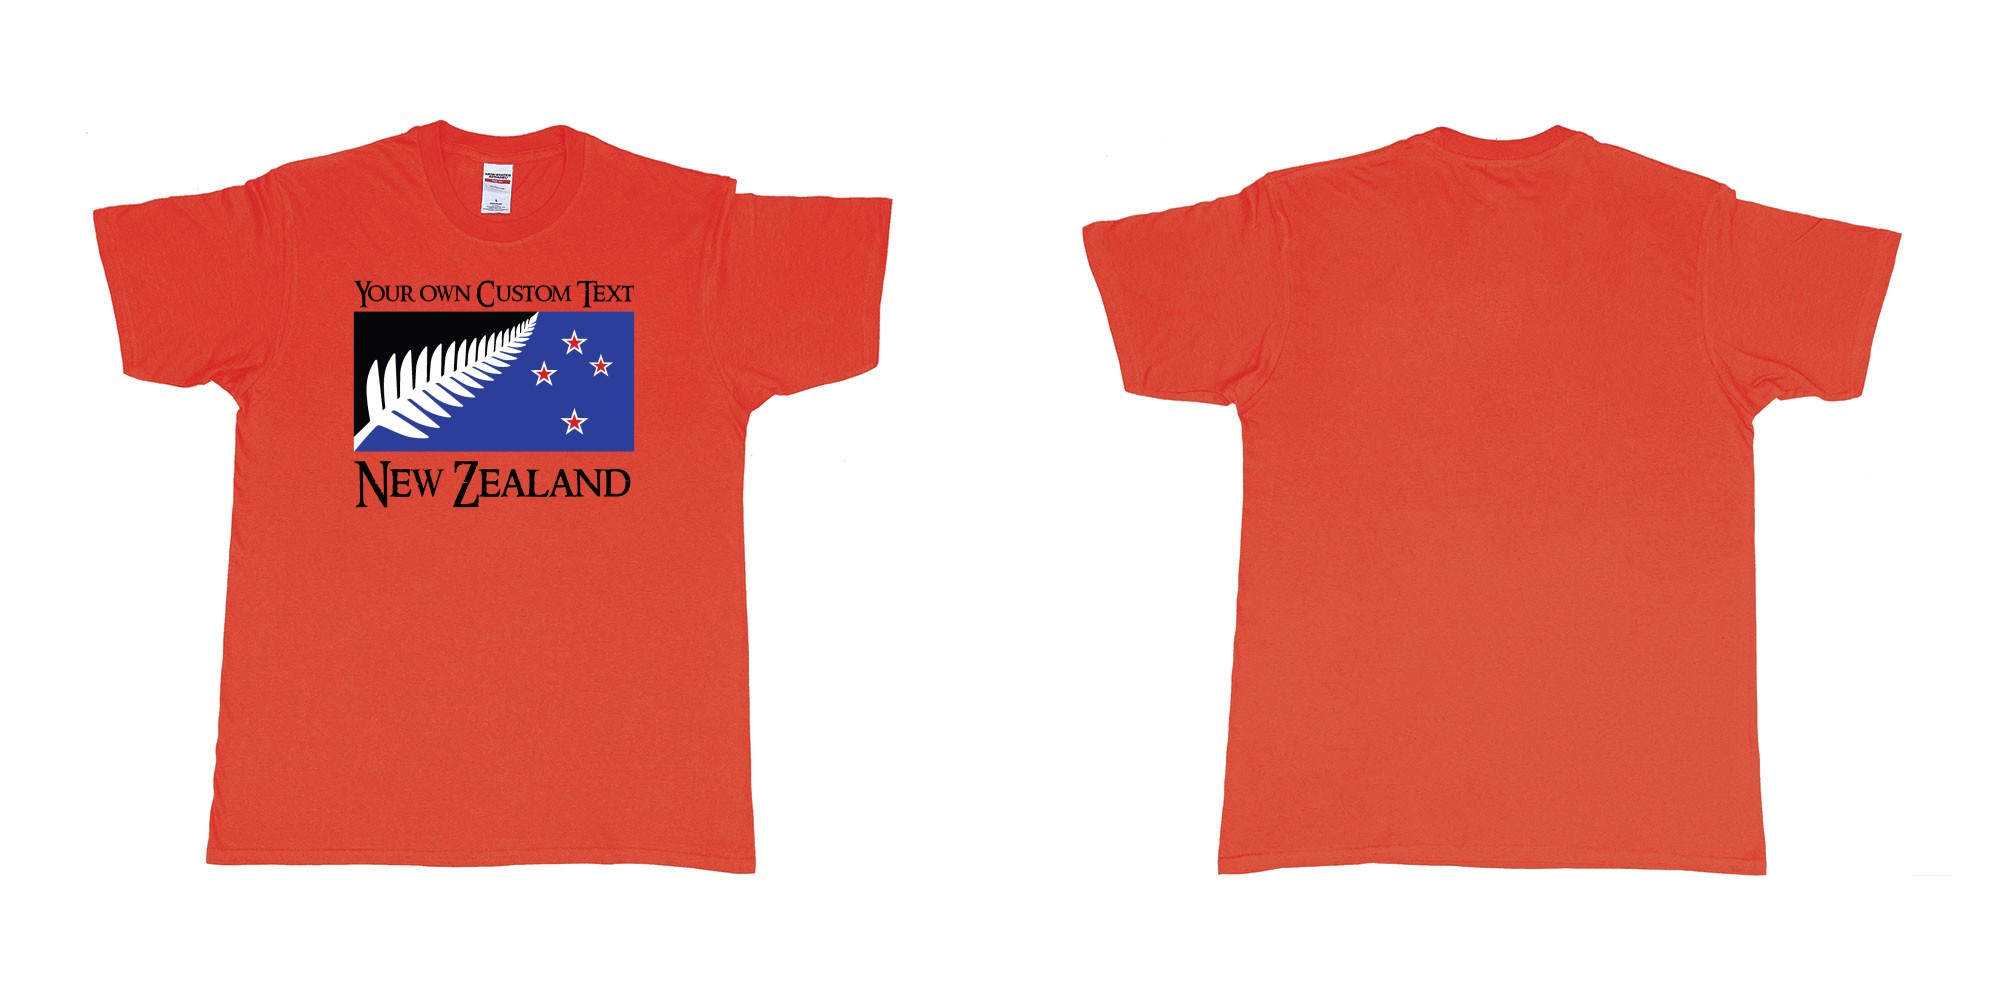 Custom tshirt design new zealand silver fern flag in fabric color red choice your own text made in Bali by The Pirate Way